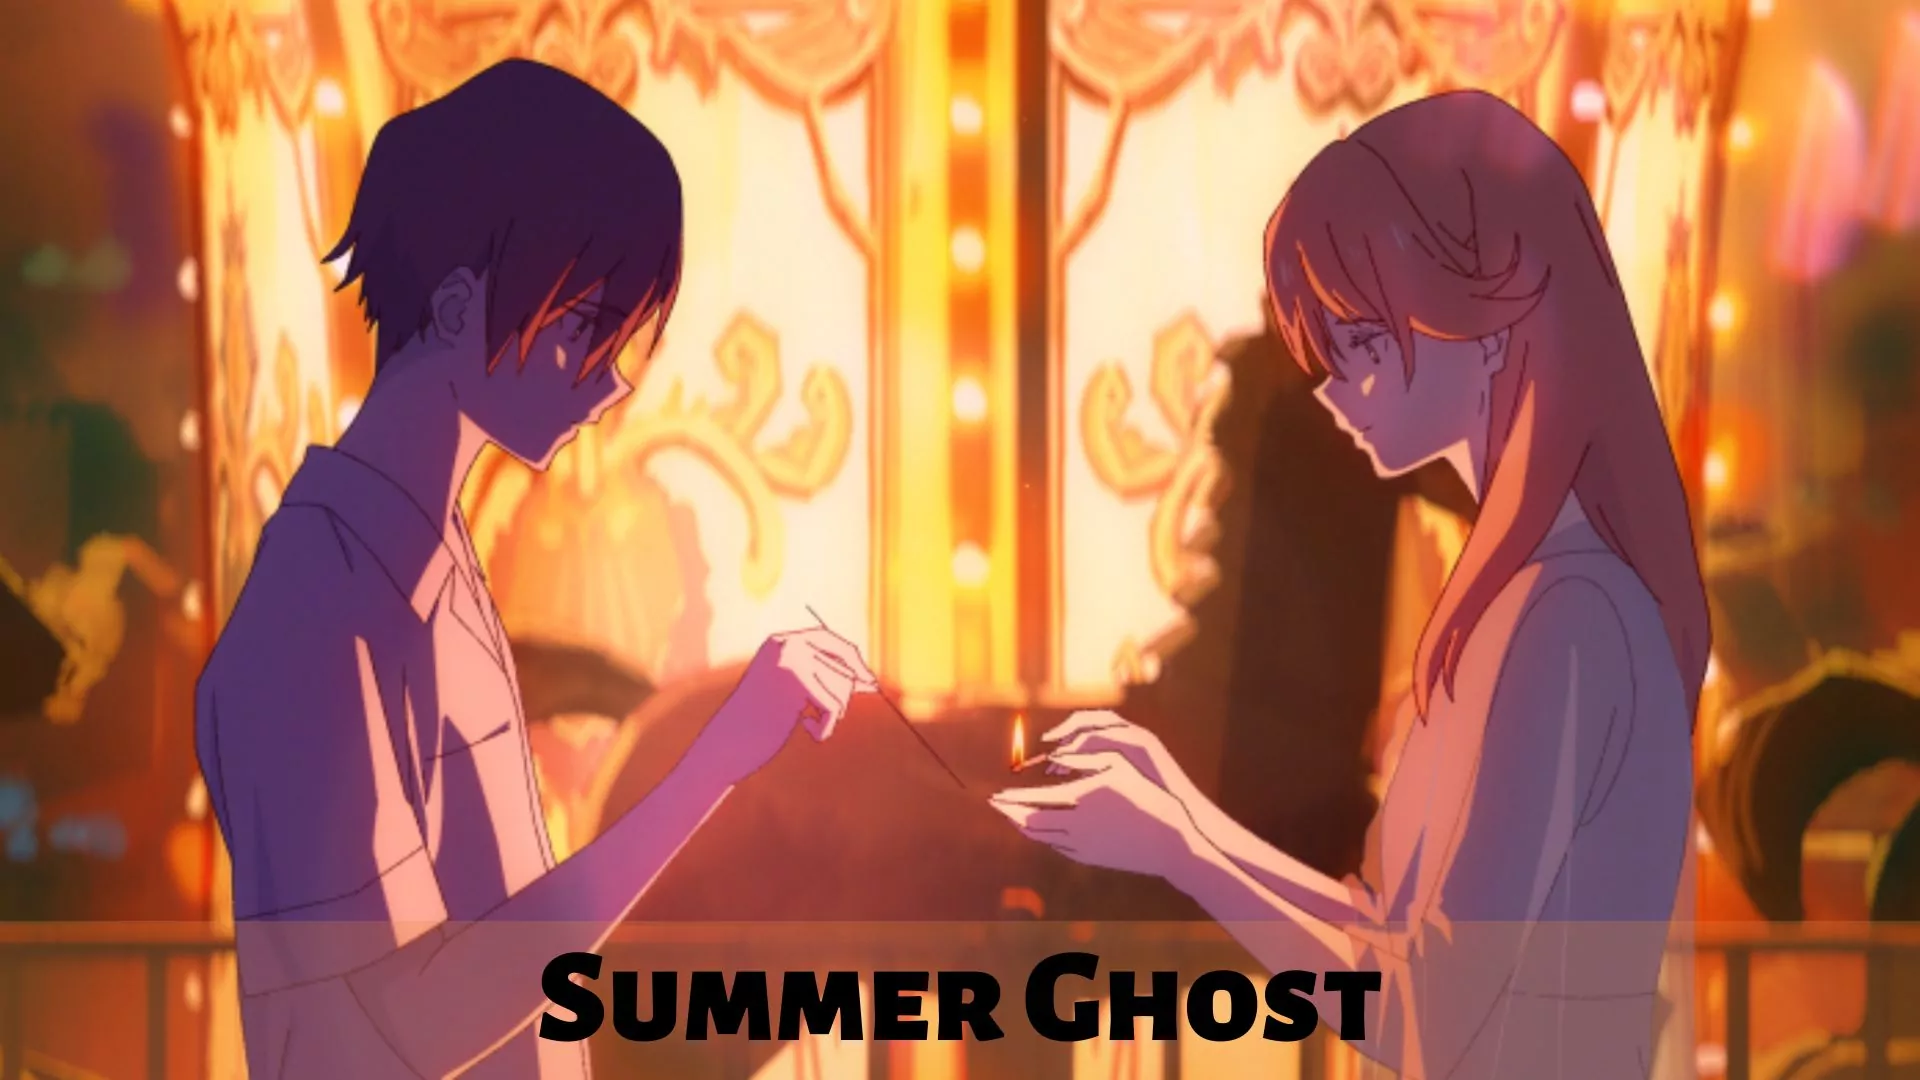 Summer Ghost Parents Guide| Summer Ghost Age Rating (2022)